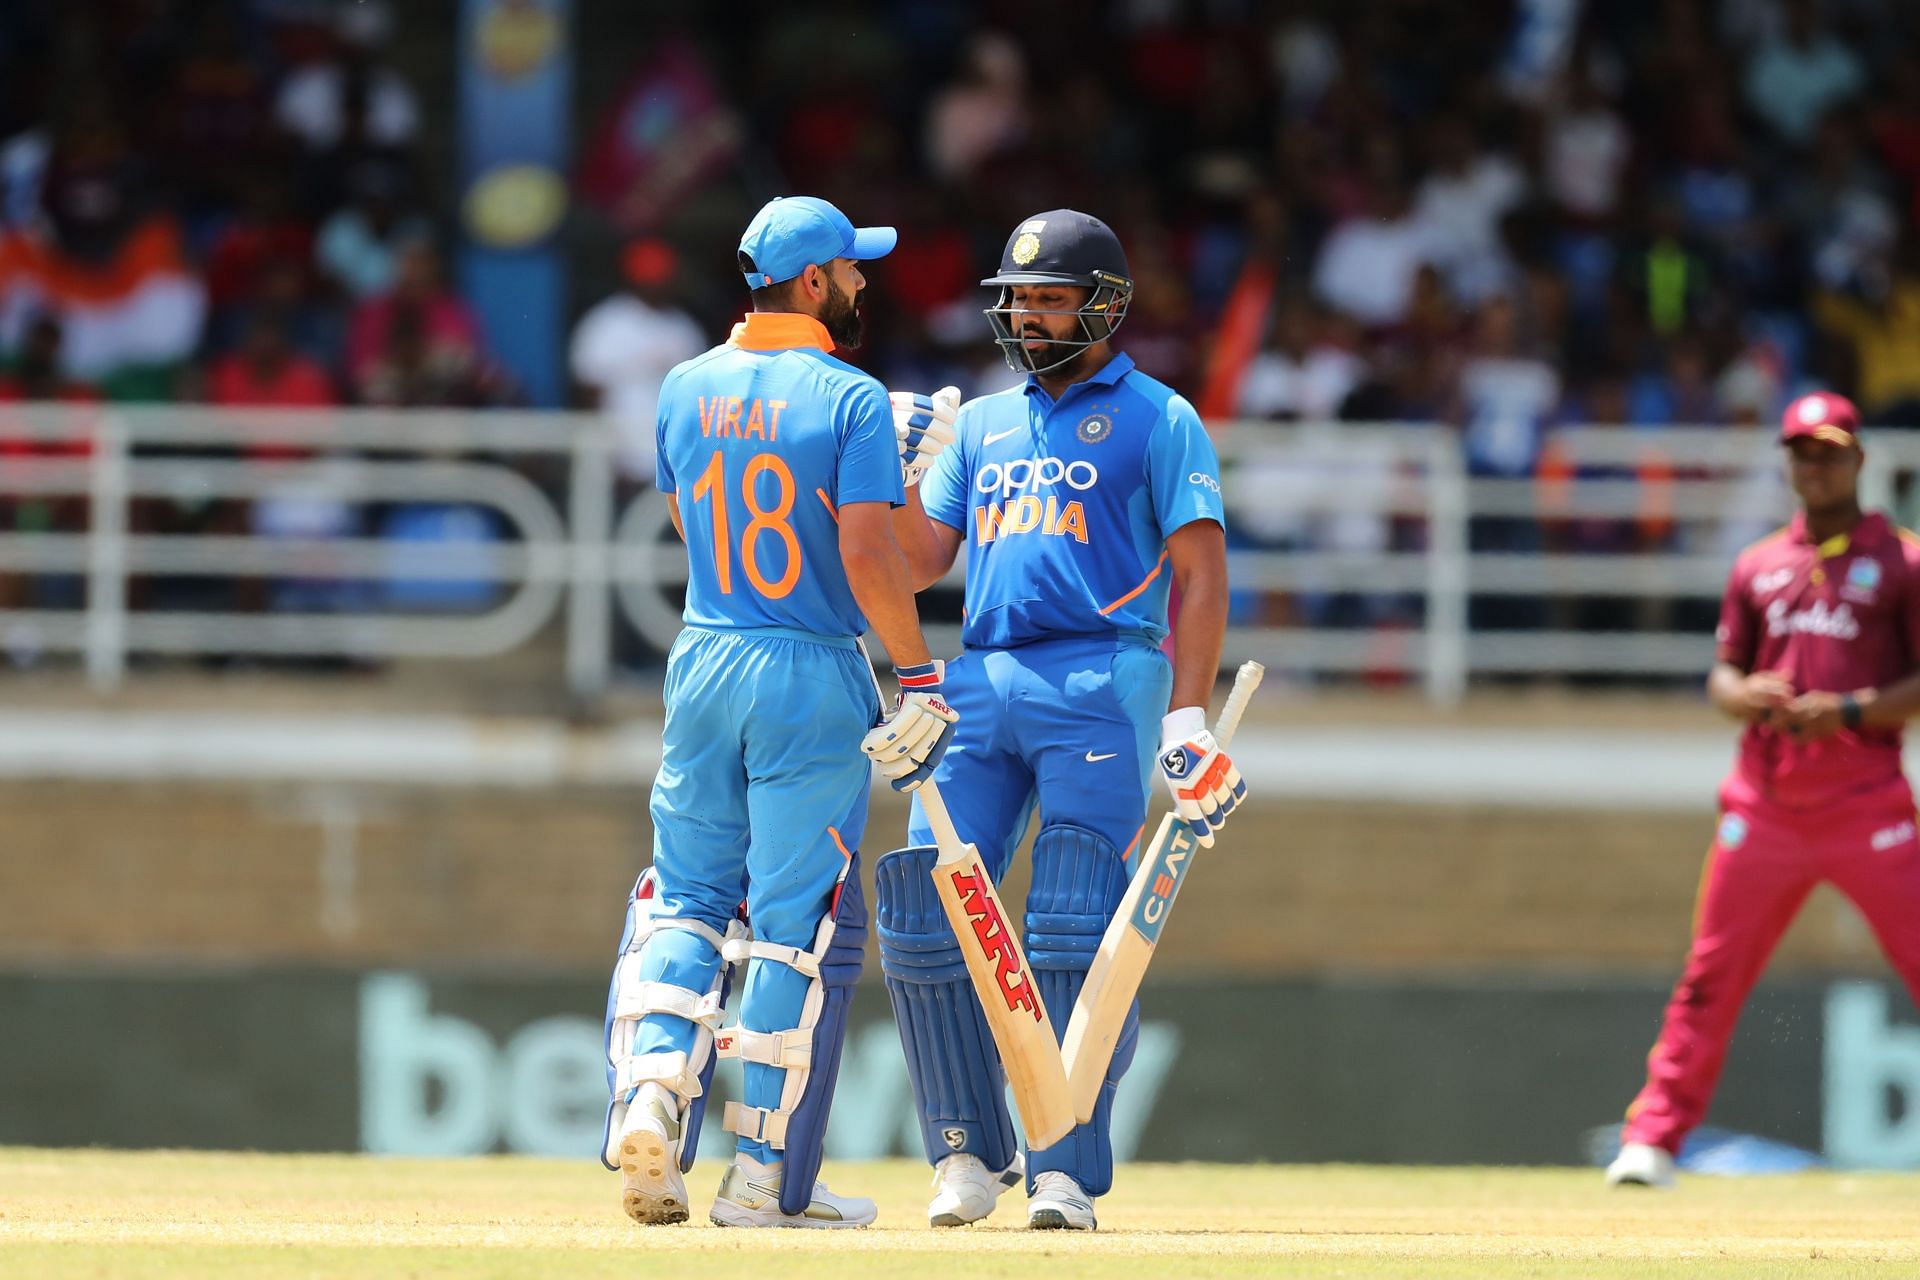 Virat Kohli and Rohit Sharma did not bat at their customary positions in the first ODI.